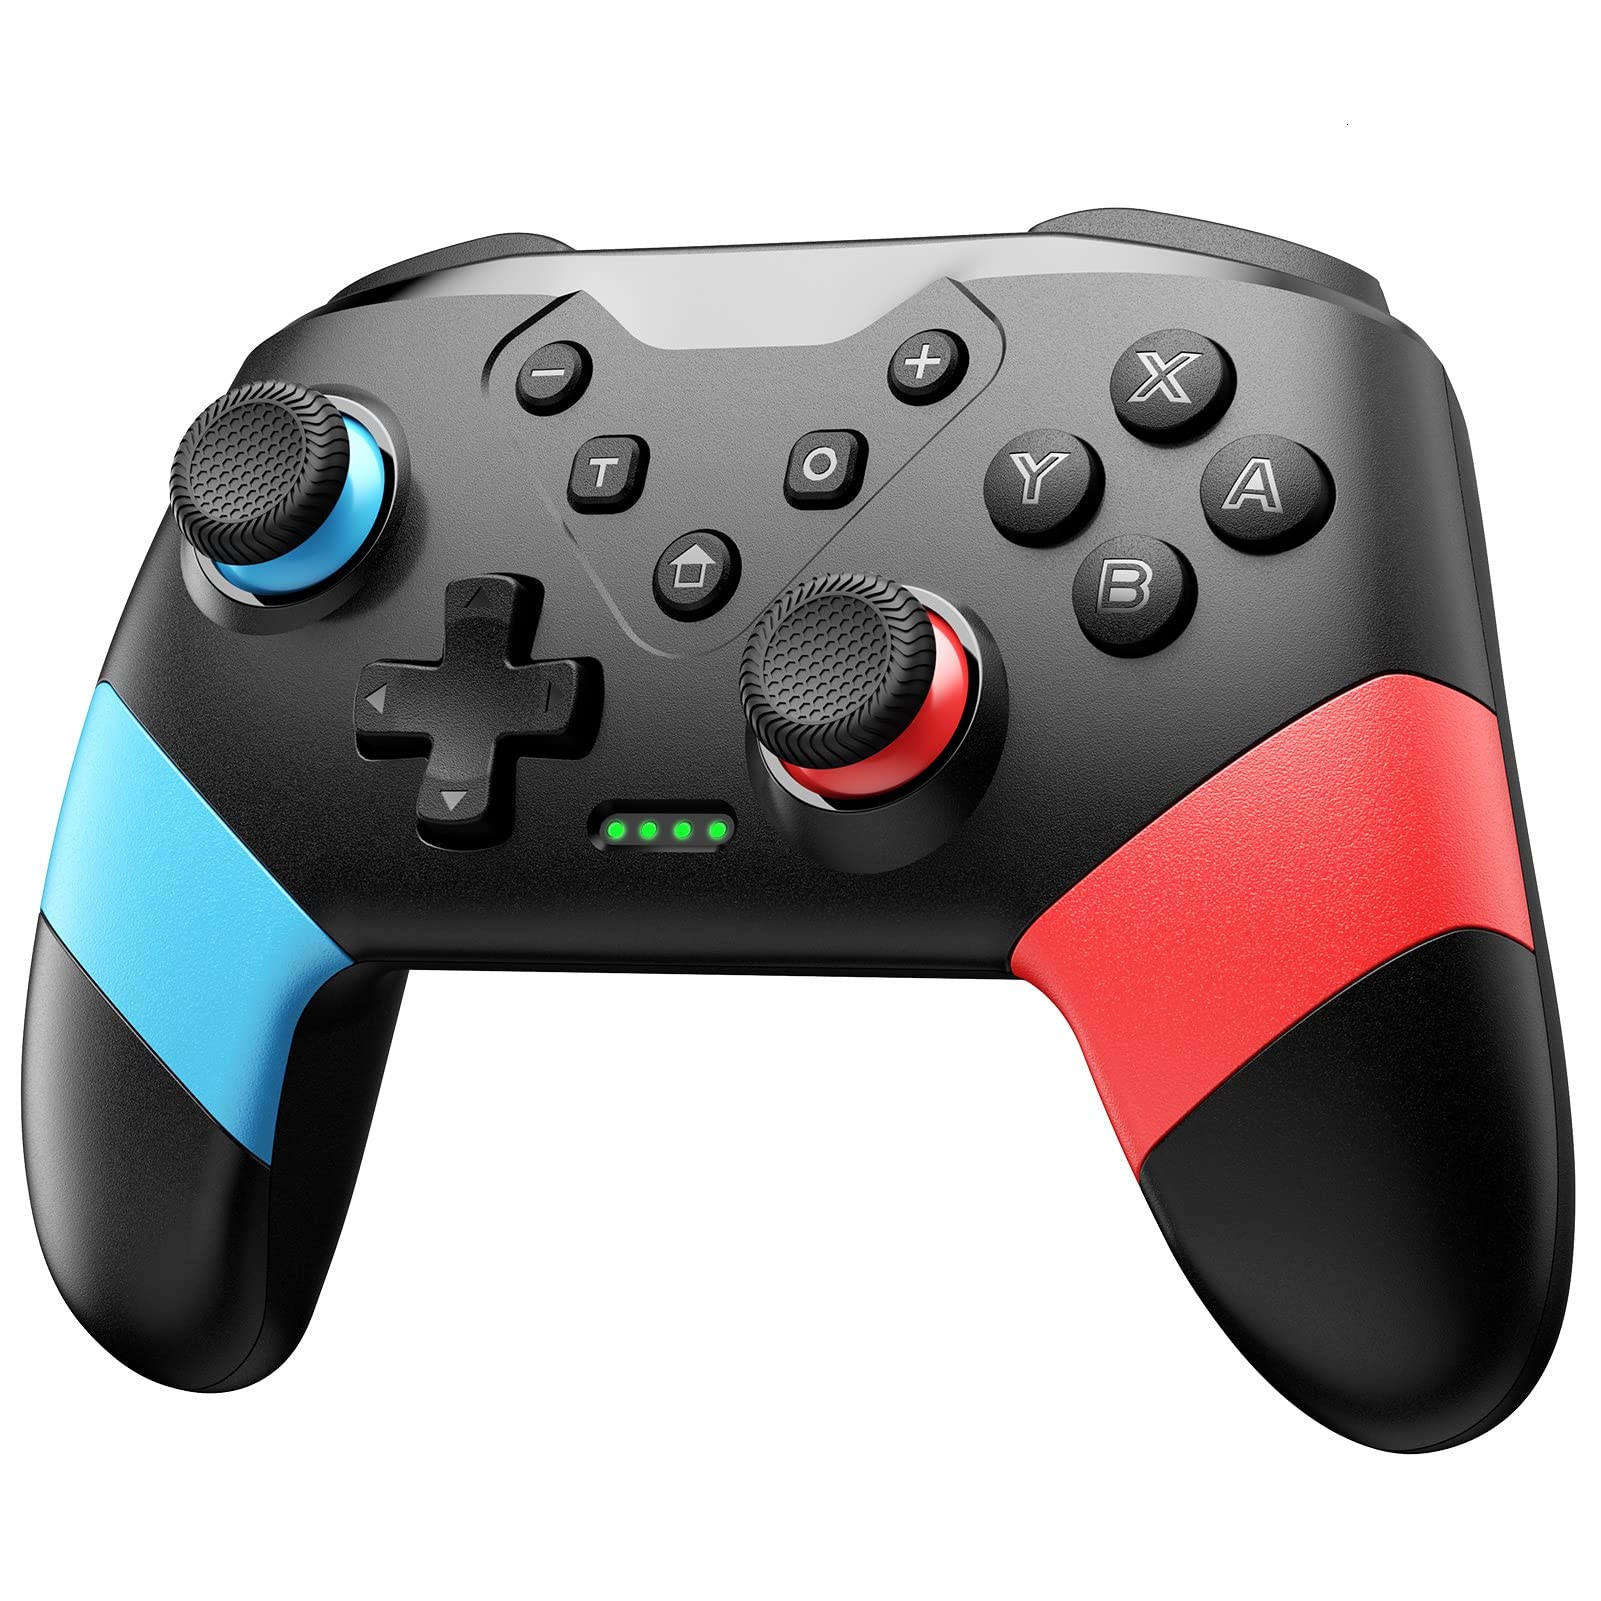 VOYEE Wireless Pro Controller for Nintendo Switch $14.99 shipped w/ Prime